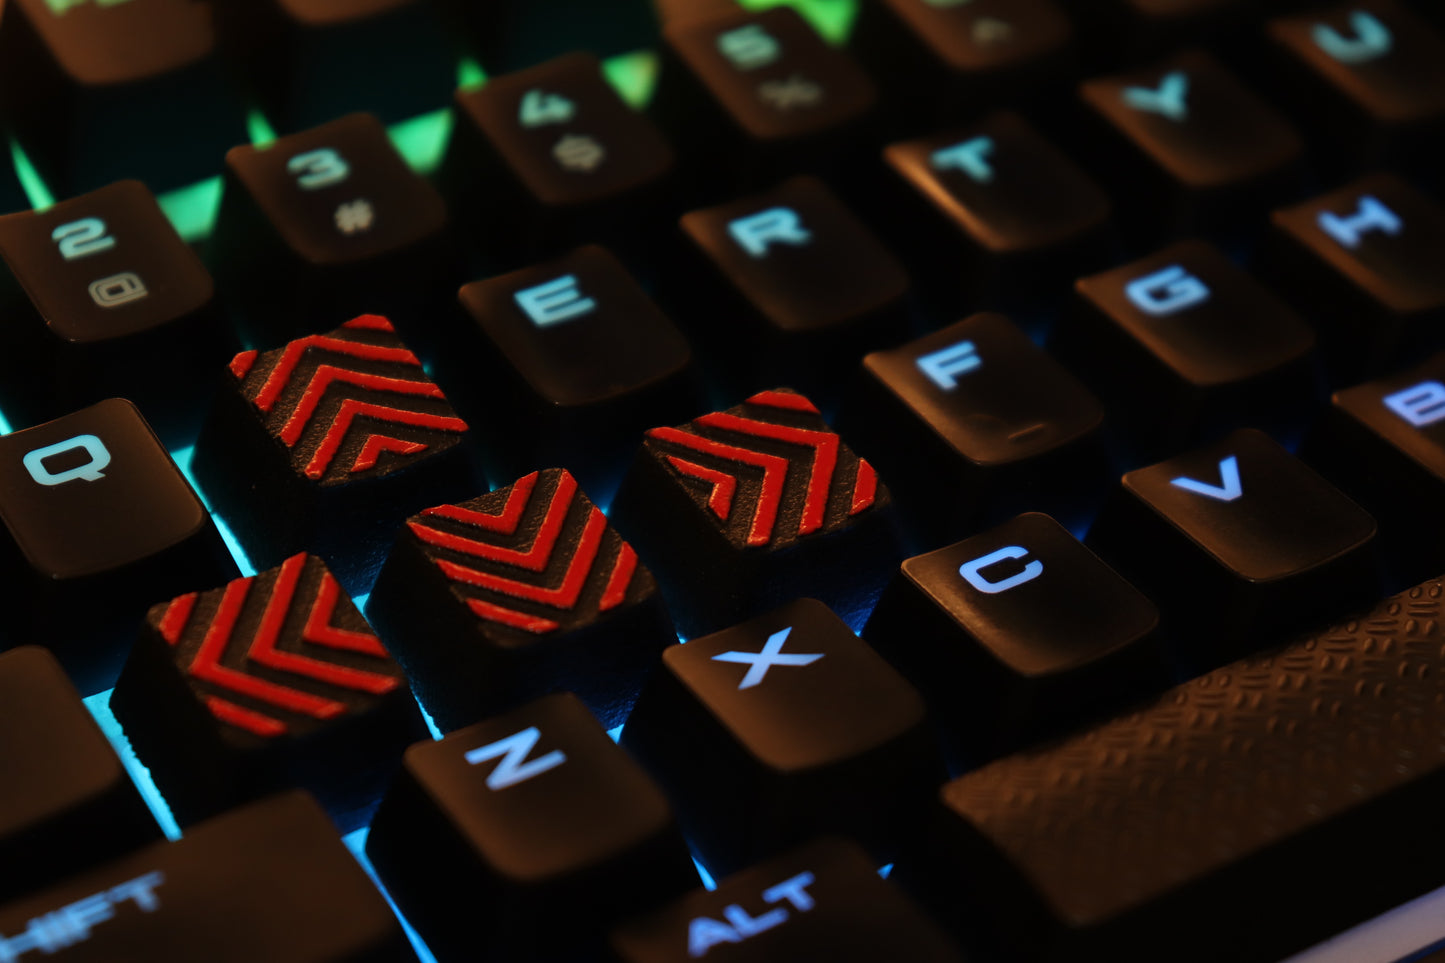 Arrow Keycap Set, textured for gaming